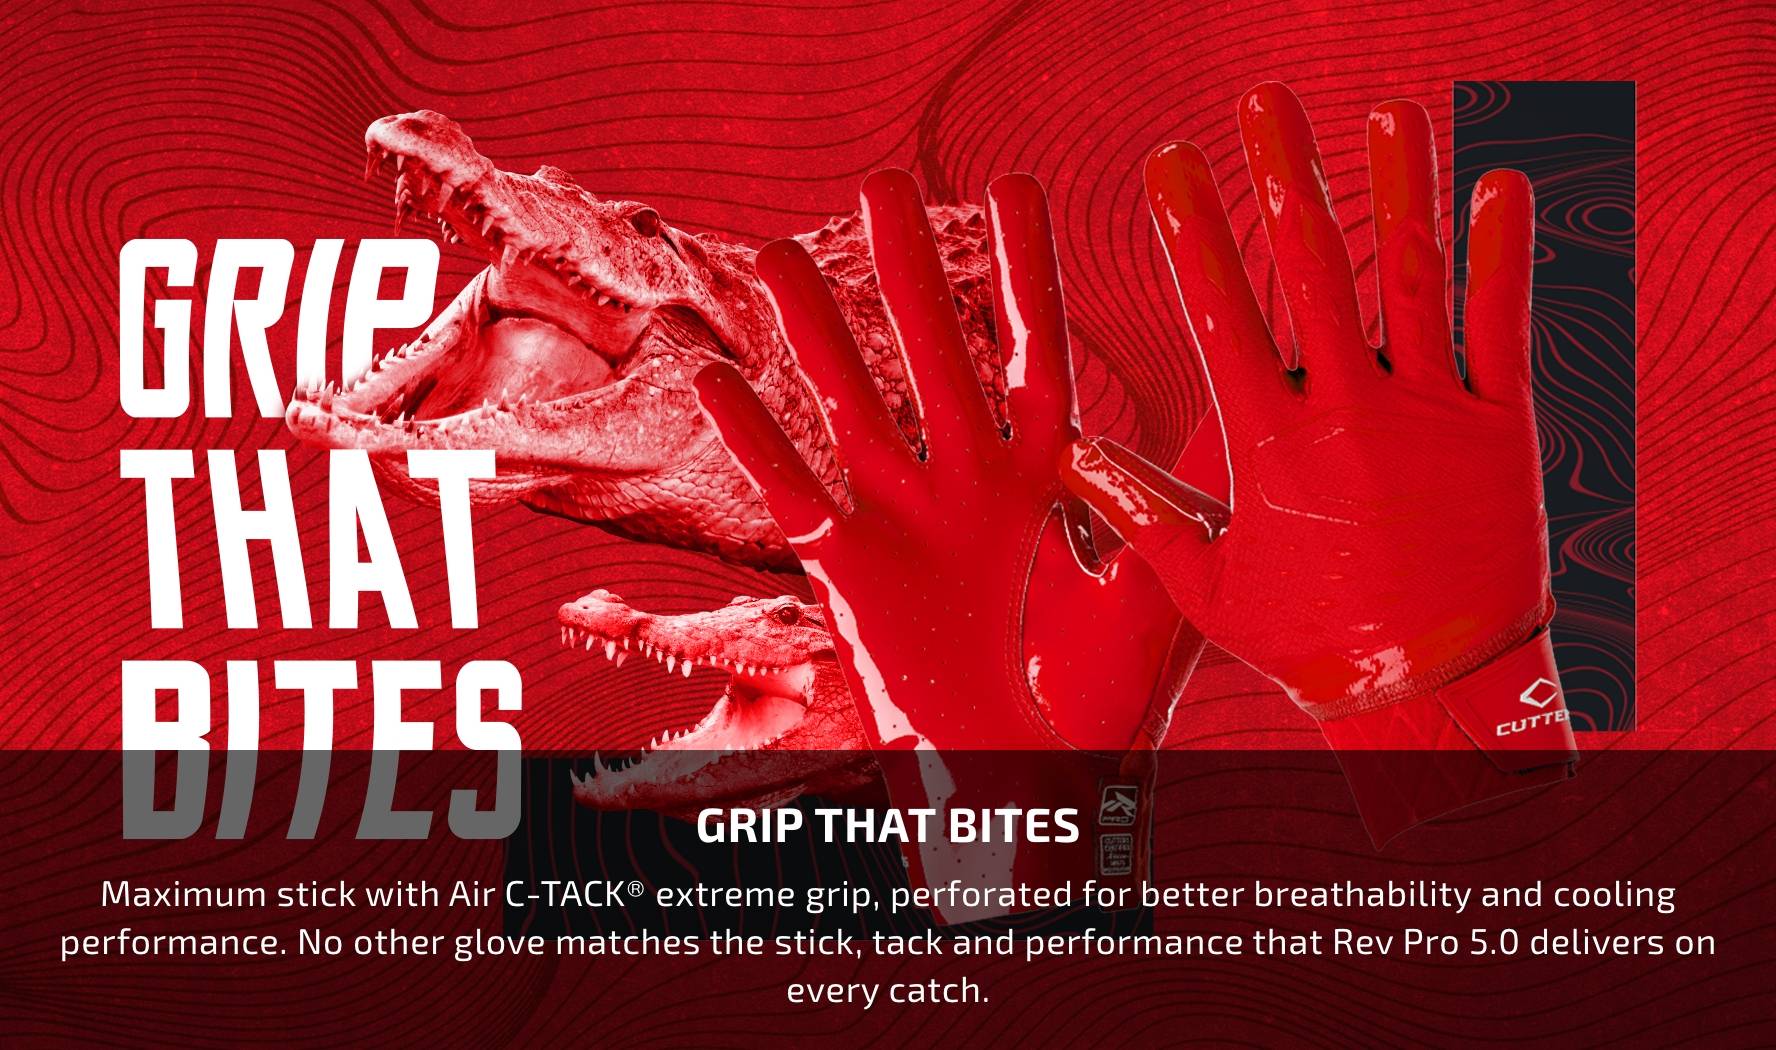 Grip That Bites. Maximum stick with Air C-Tack extreme grip, perforated for better breathability and cooling performance. No other glove matches the stick, tack and performance that Rev Pro 5.0 delivers on every catch.